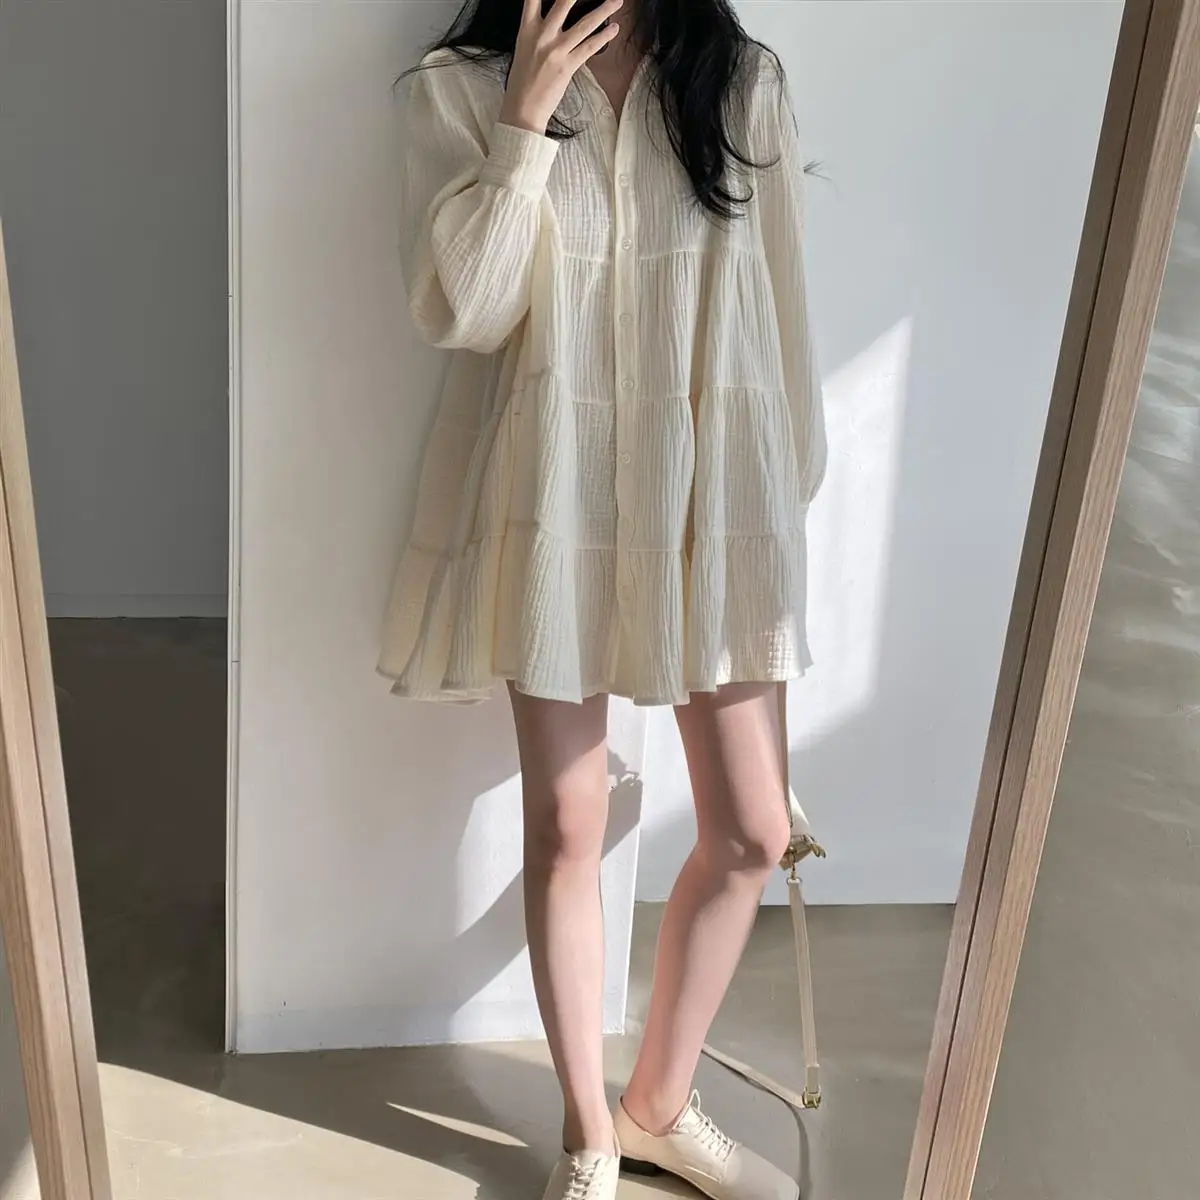 Long Sleeve Dress Women Ins Ulzzang Spring Lovely Solid A-line Ruffles Korean Apricot Fashion Retro Turn-down Collar  Clothes boho dresses